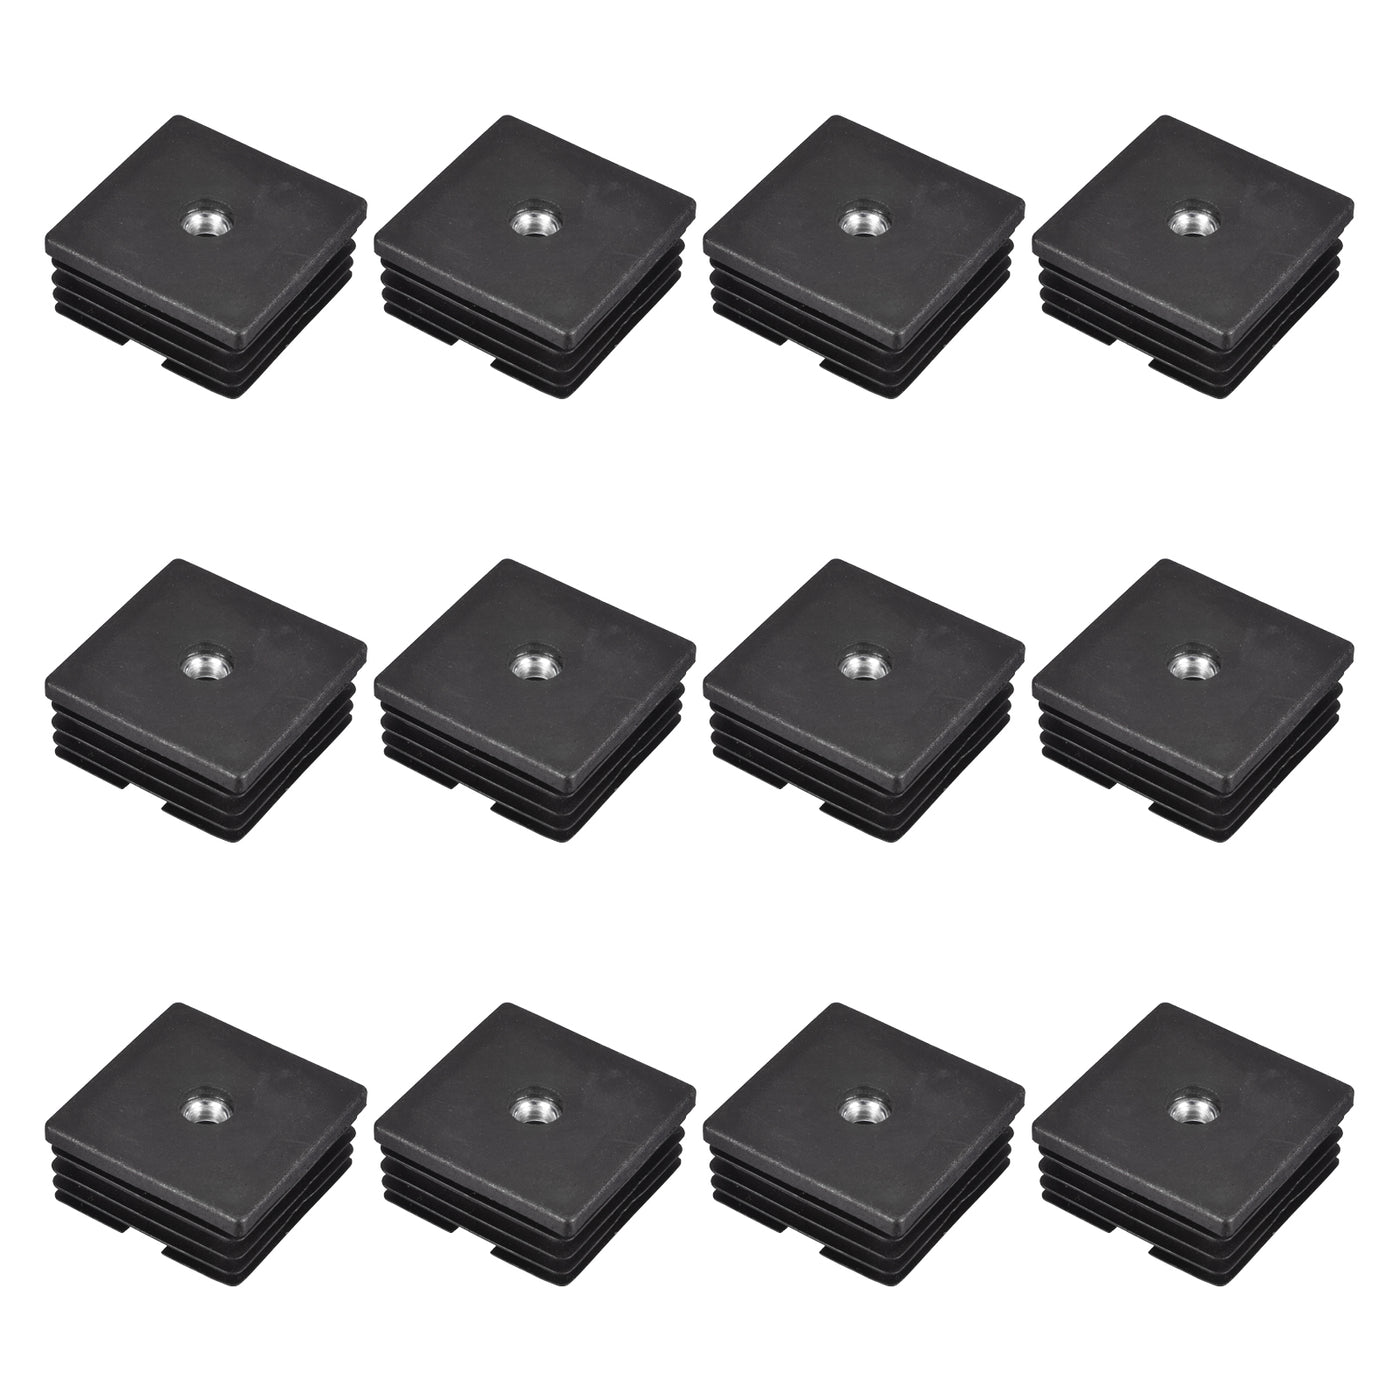 uxcell Uxcell 12Pcs 1.97"x1.97" Caster Insert with Thread, Square M8 Thread for Furniture